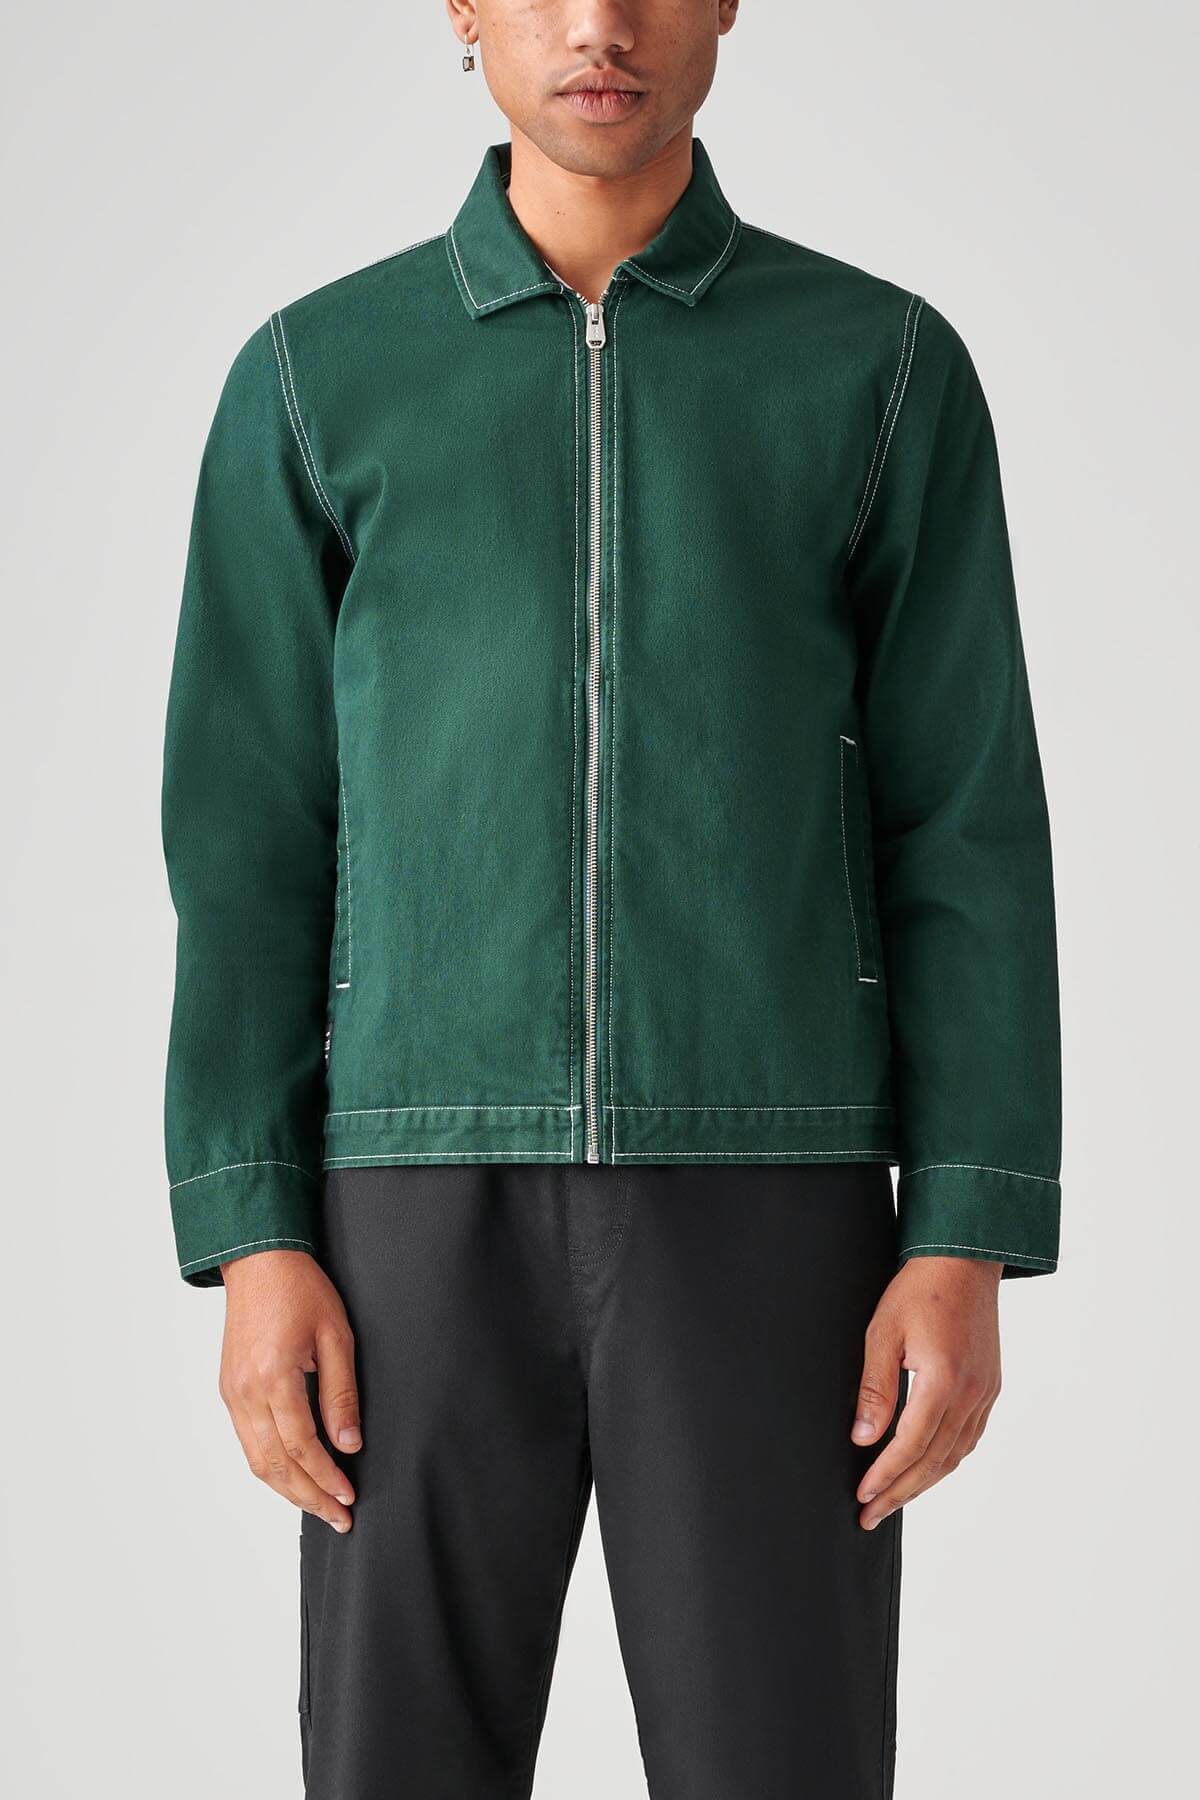 off course twill jacket night green